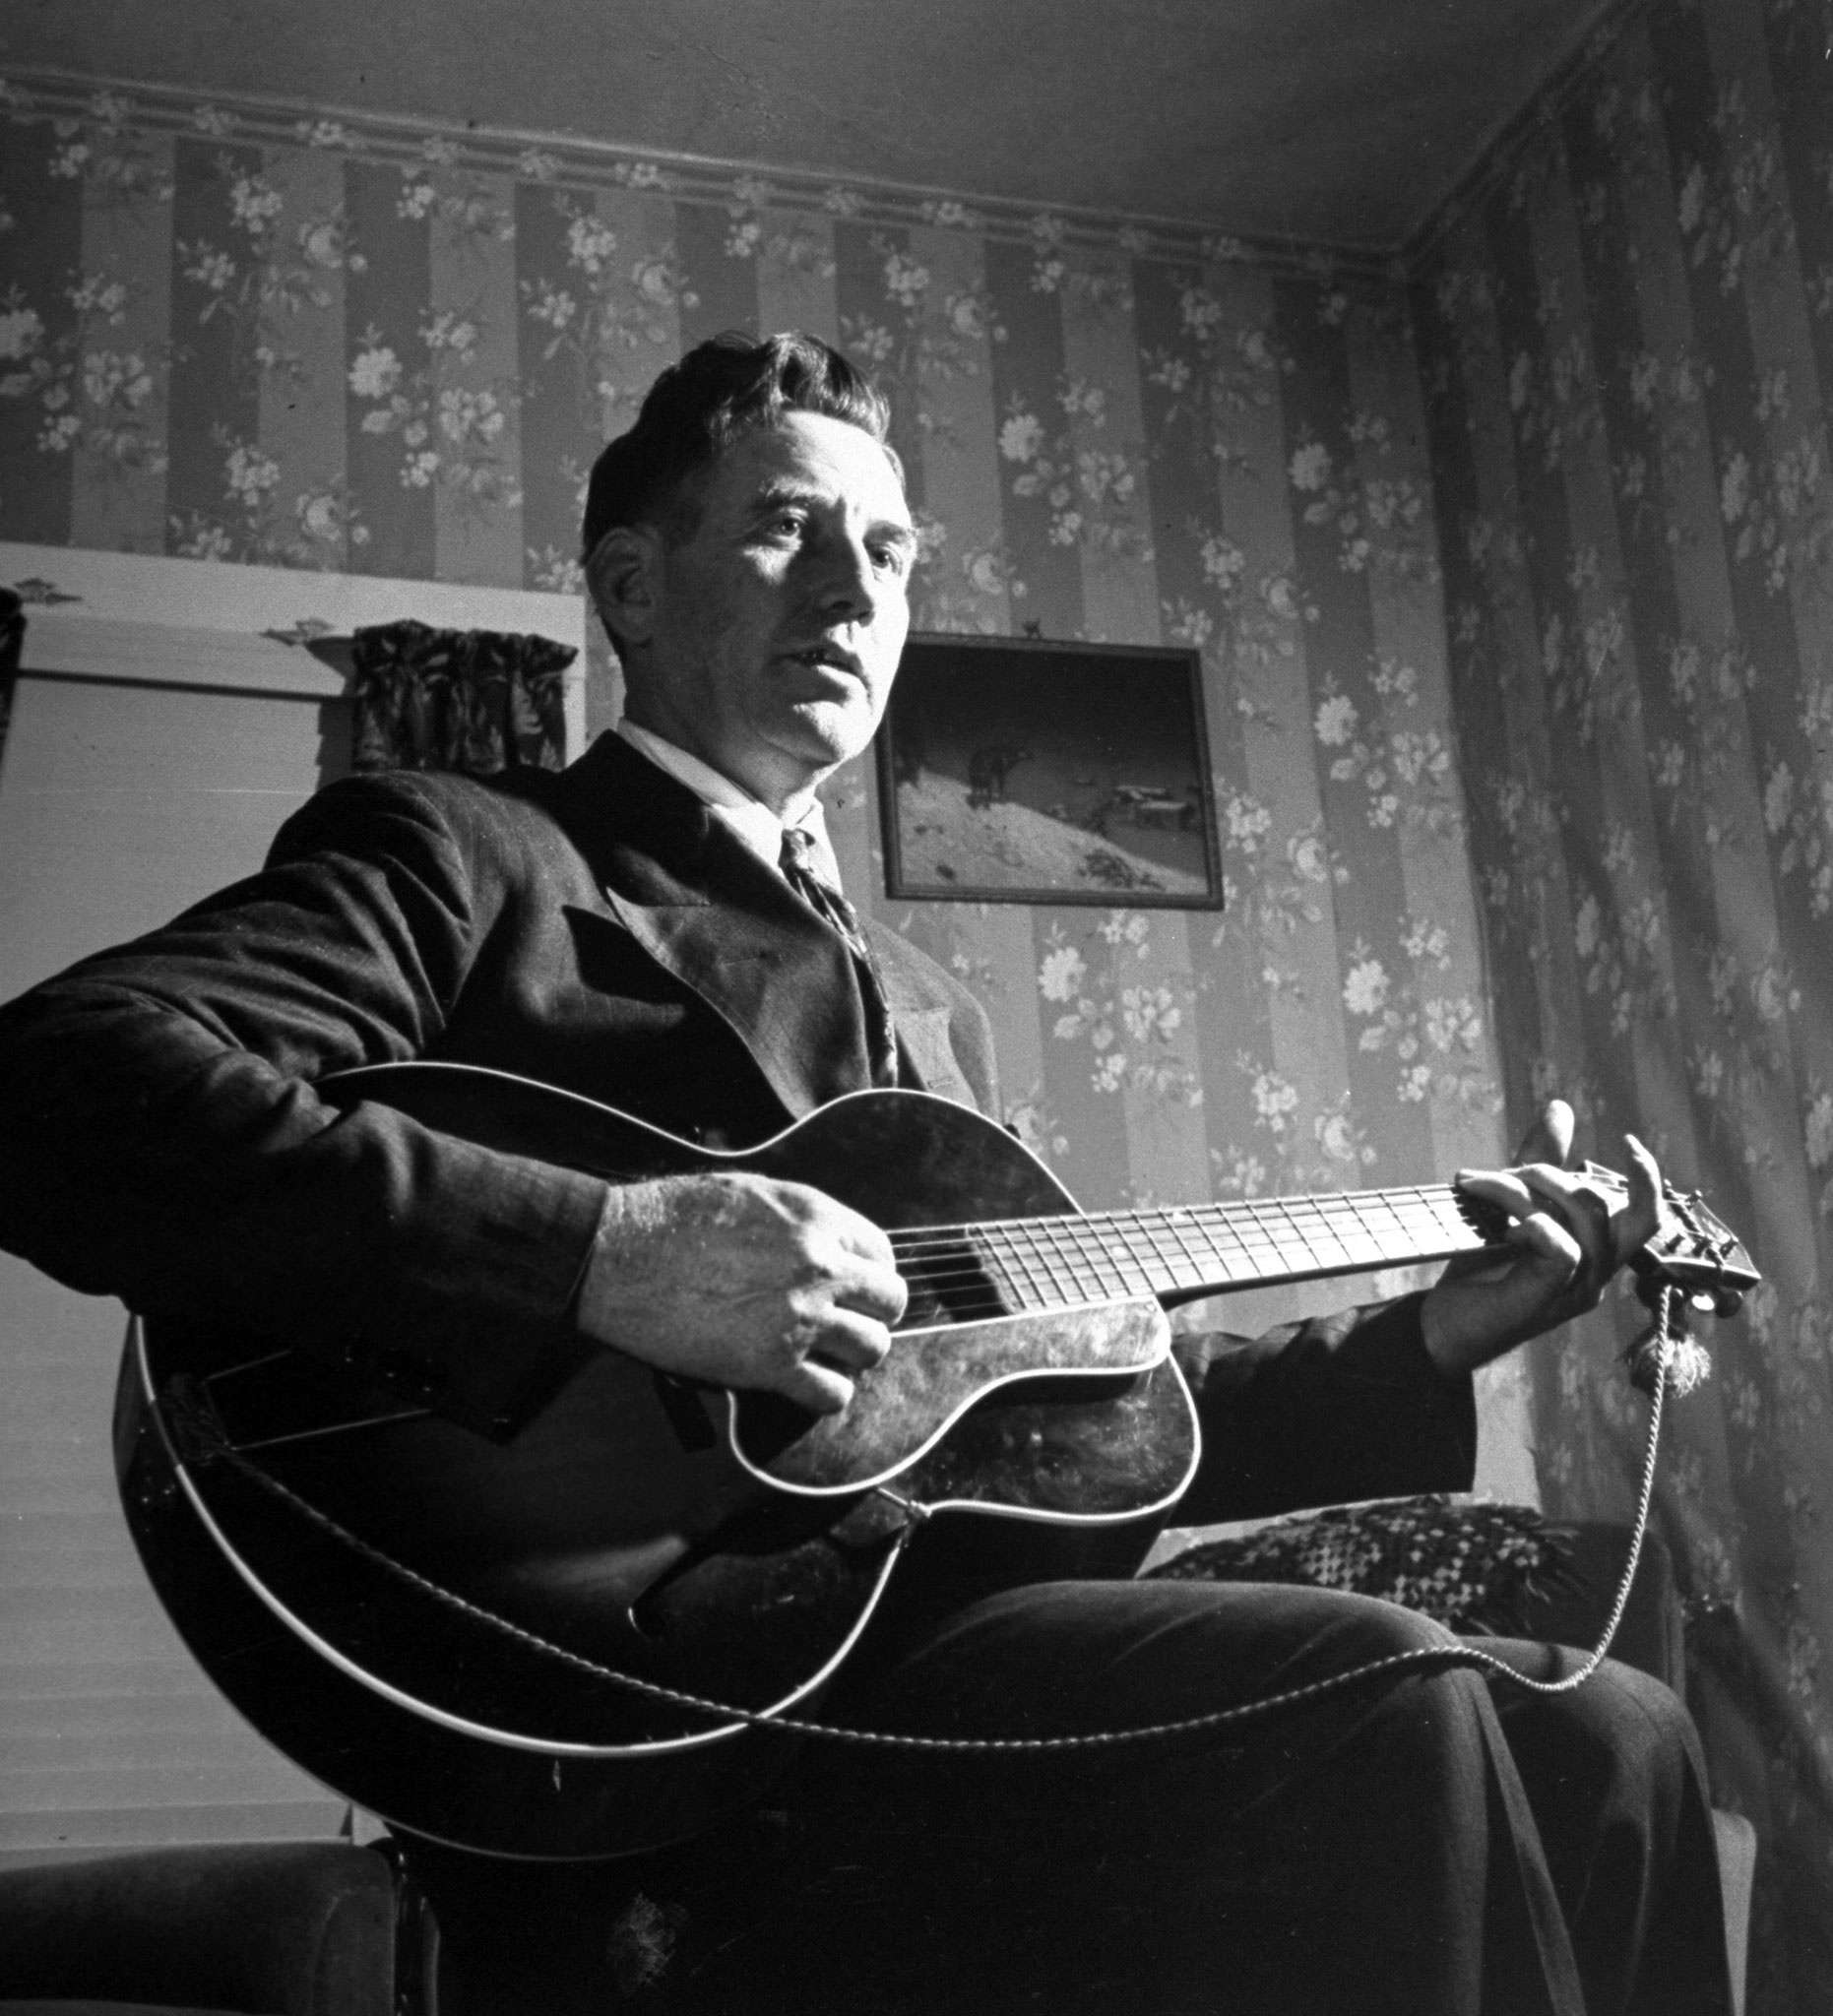 Considered the father of Country music, A. P. Carter, singing and playing guitar as he sits at home.